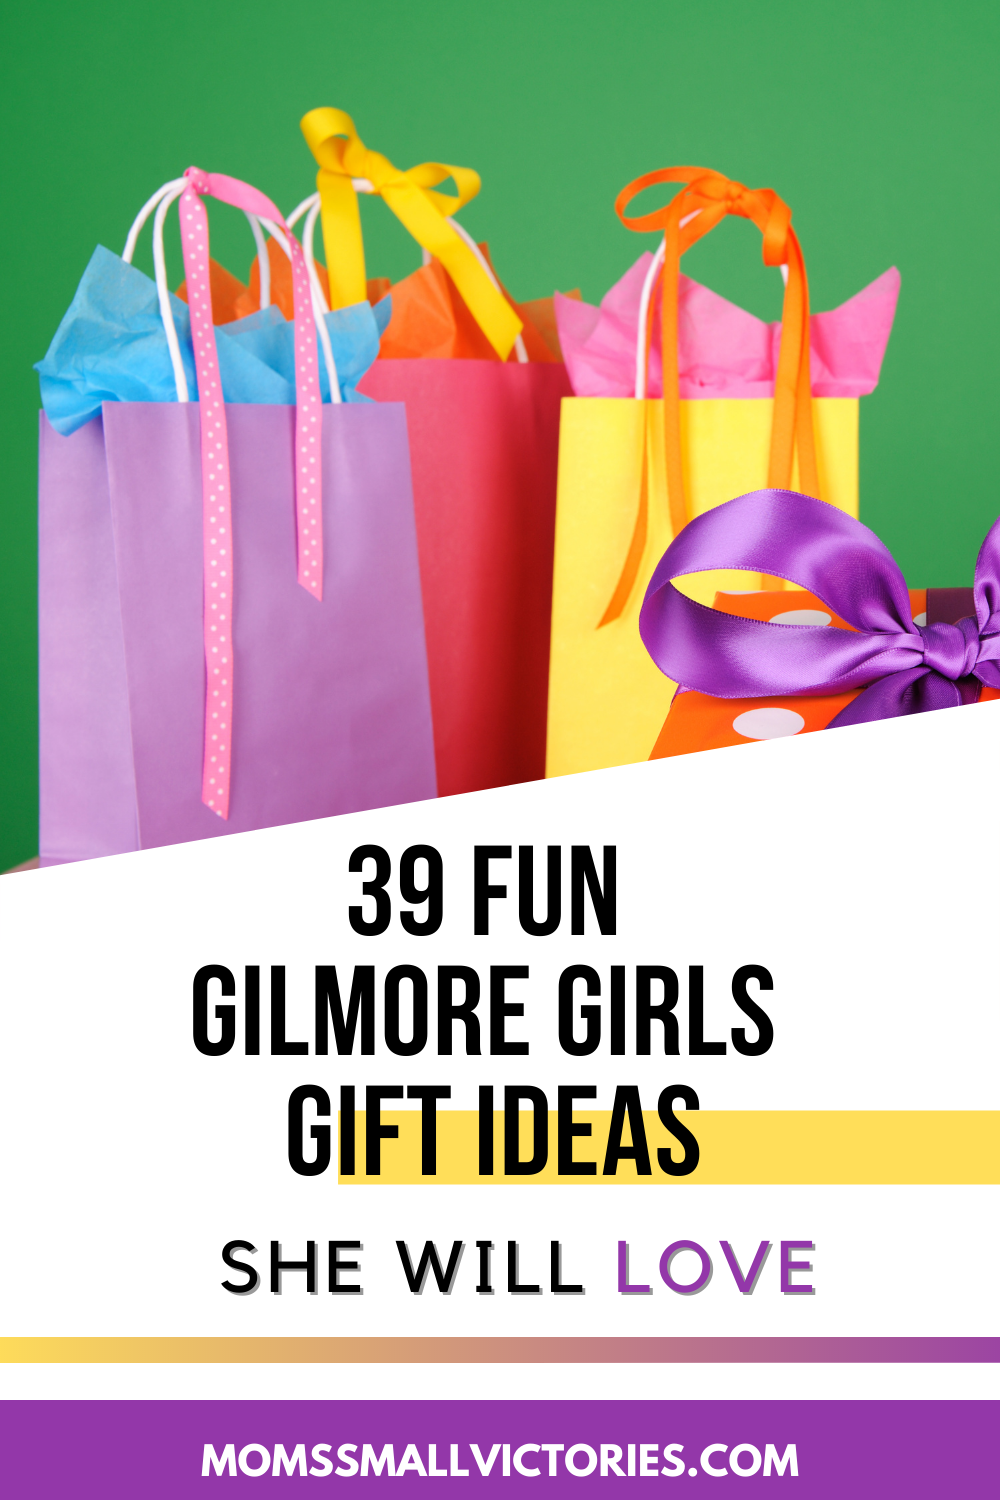 30 Fun Glmore Girls Gift Ideas She will love. Brightly colored purple, red and yellow gift bags on a bright green background.